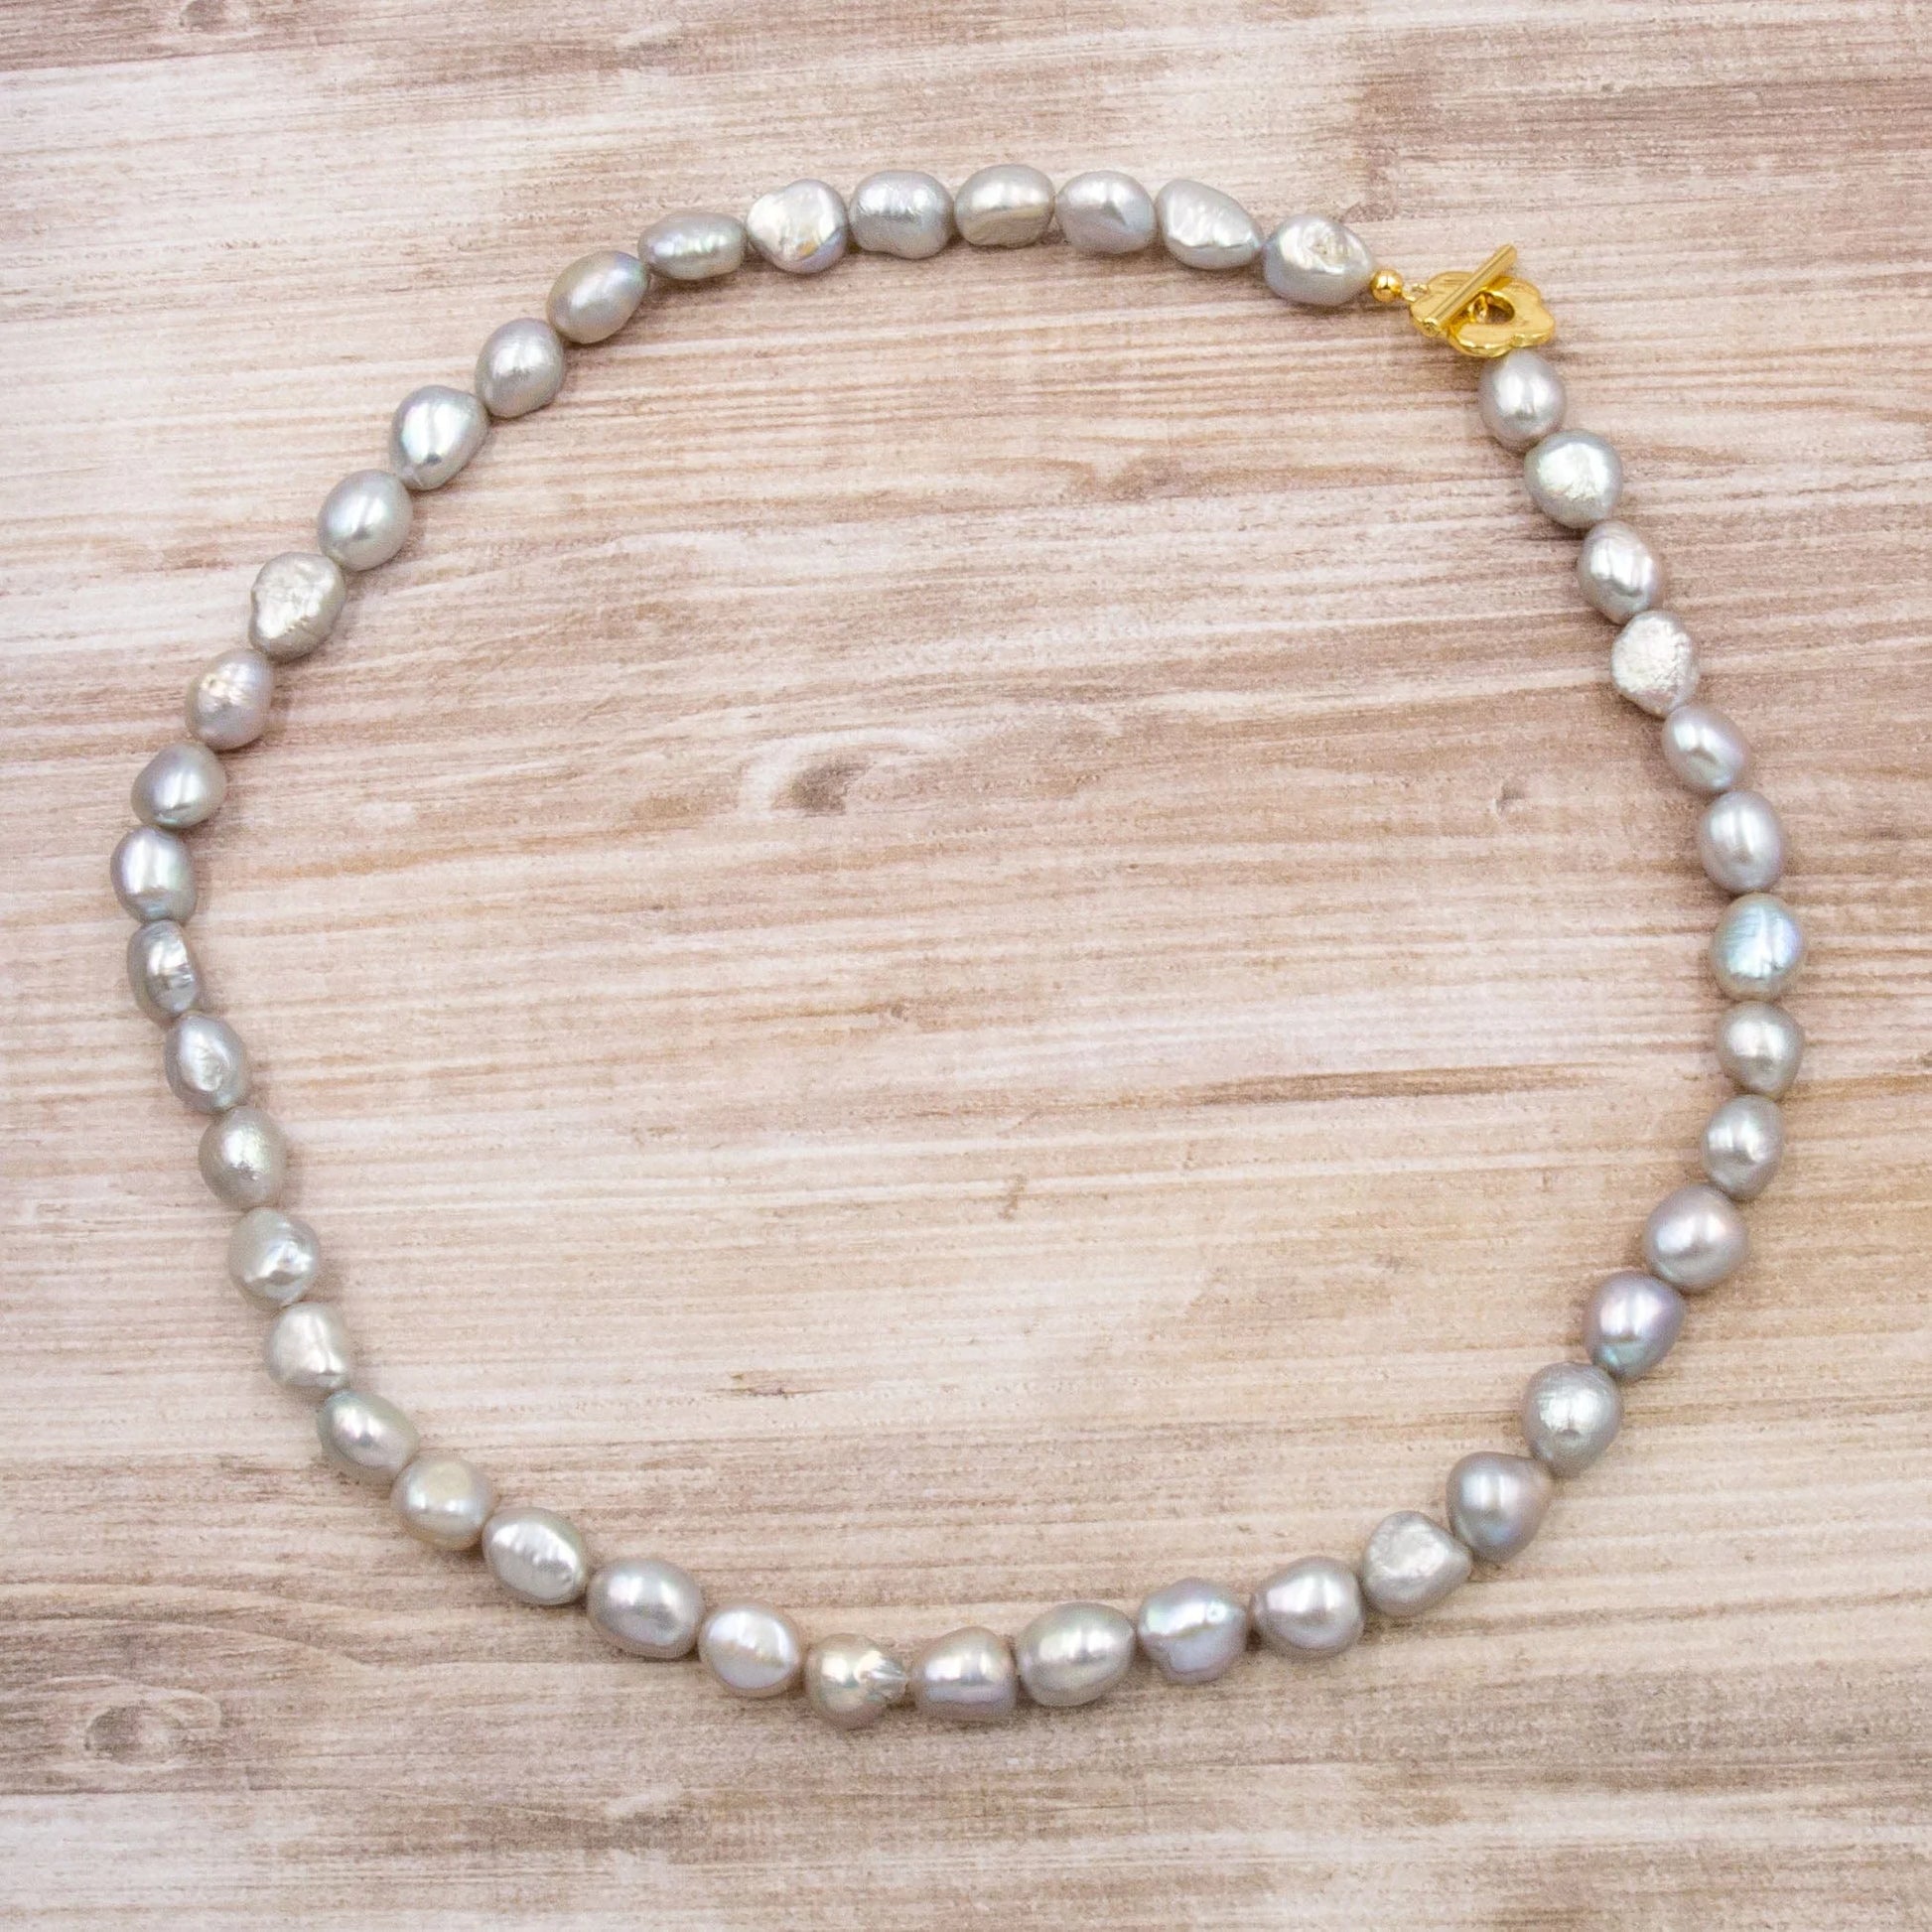 Arbor Trading Post Necklaces Handcrafted Freshwater Silver Baroque Pearl Strand Necklace, 8-11mm Pearls